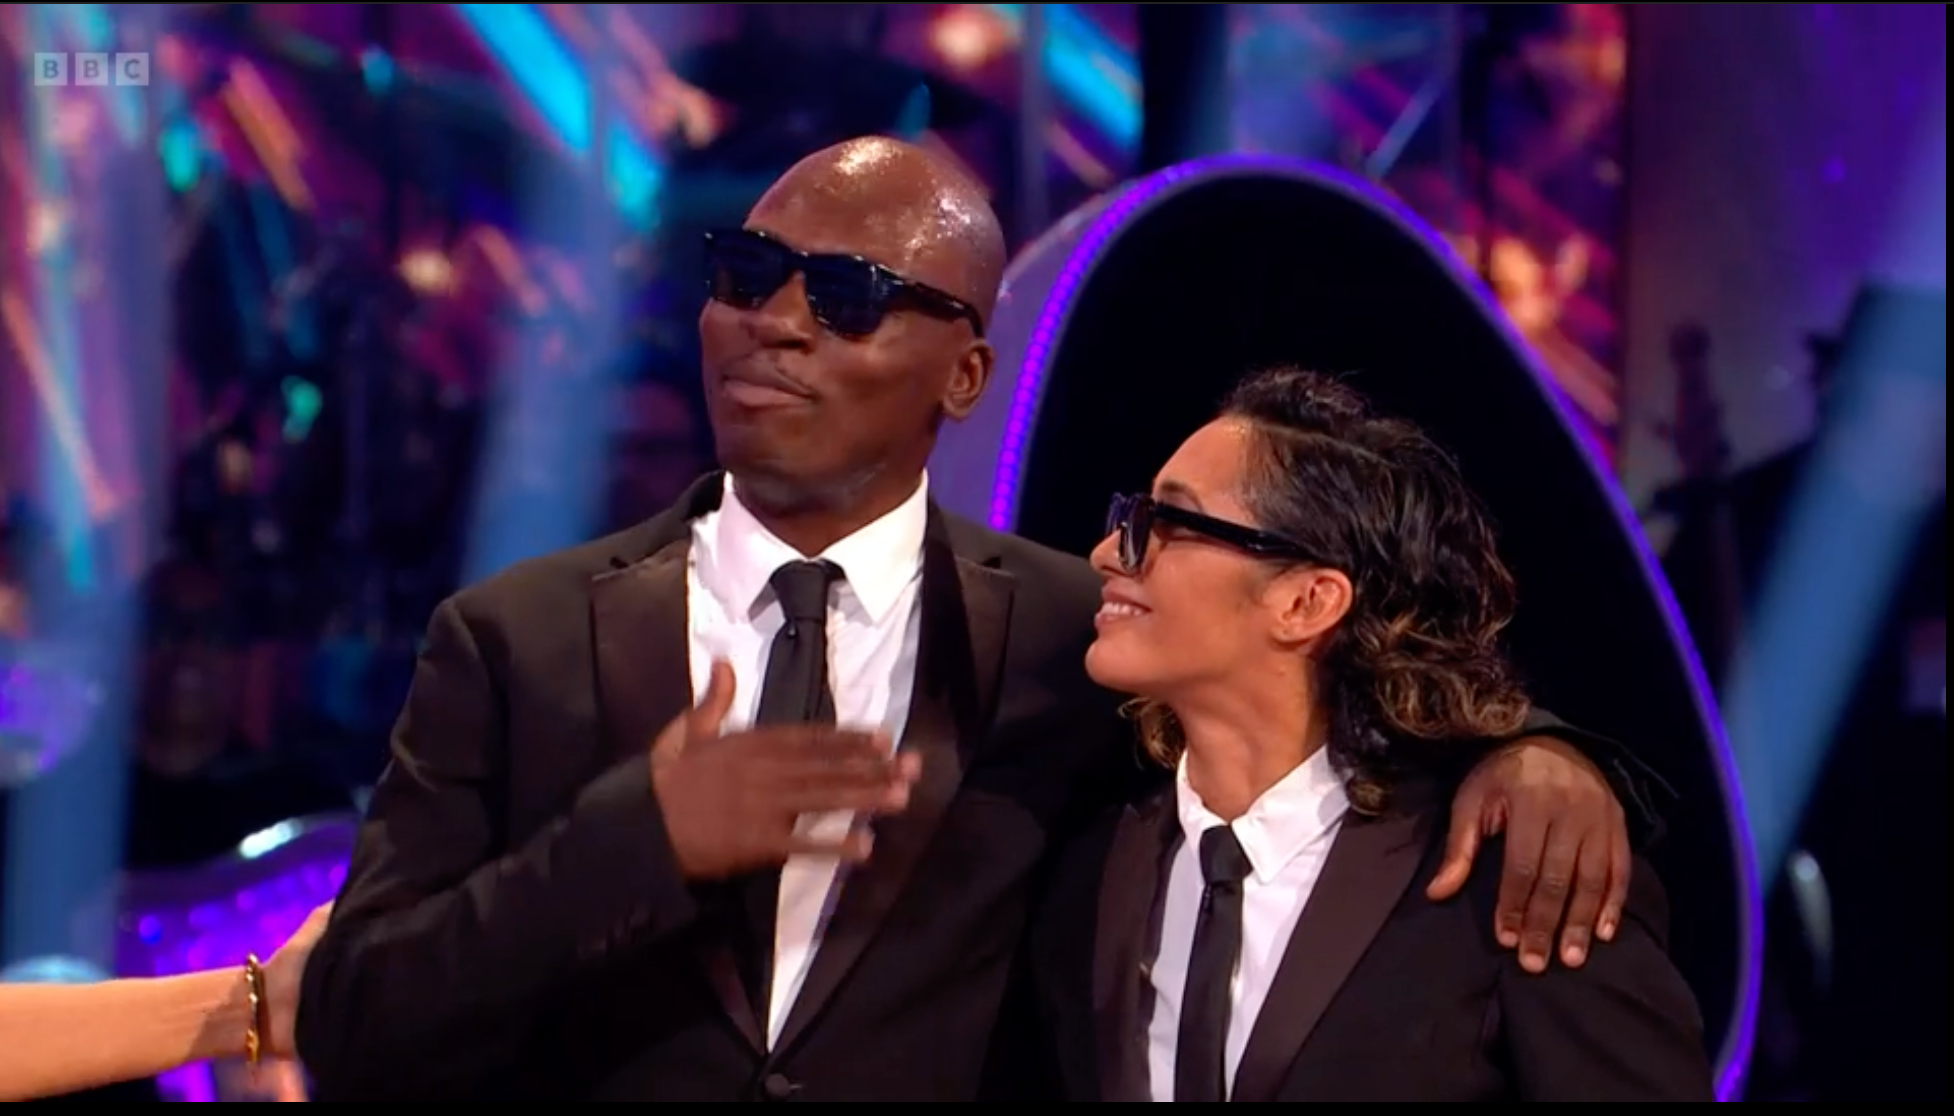 Eddie Kadi and his partner Karen Hauer scored the first 10 of the series with their couple’s choice